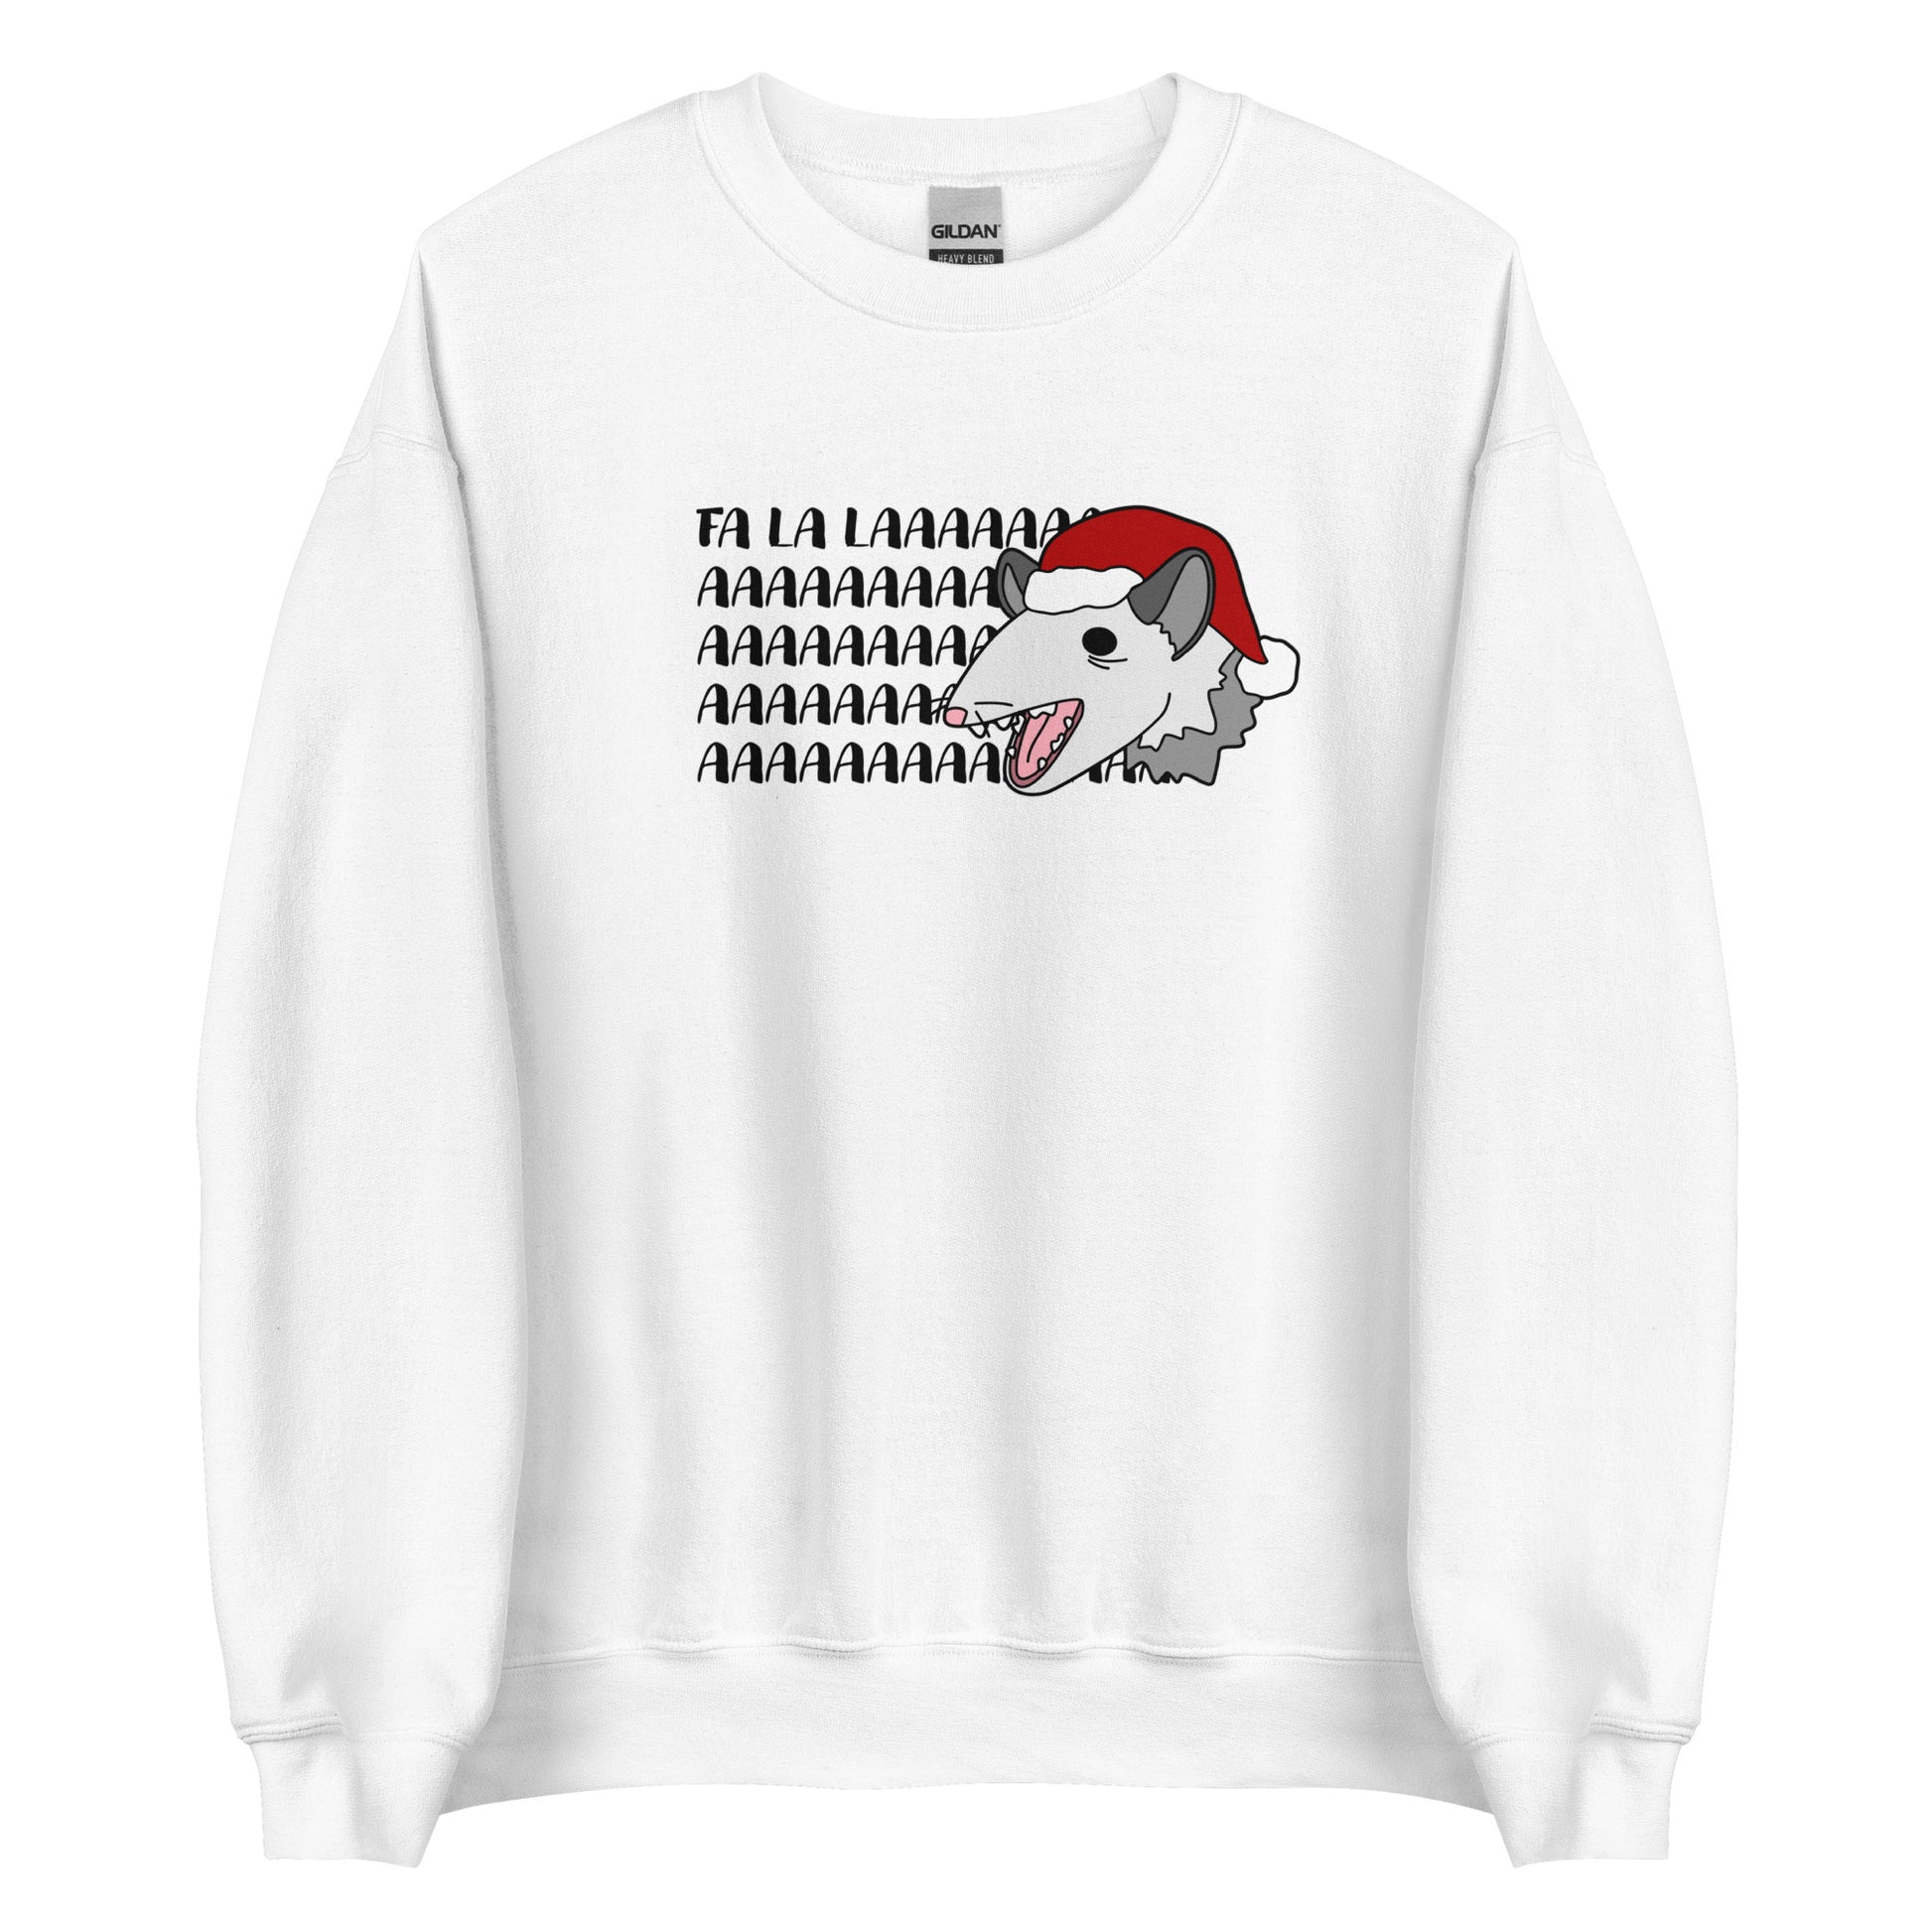 A white crewneck sweatshirt featuring an illustration of a possum wearing a Santa hat. The possum appears to be screaming, and text behind his head reads "FA LA LAAAAAA"